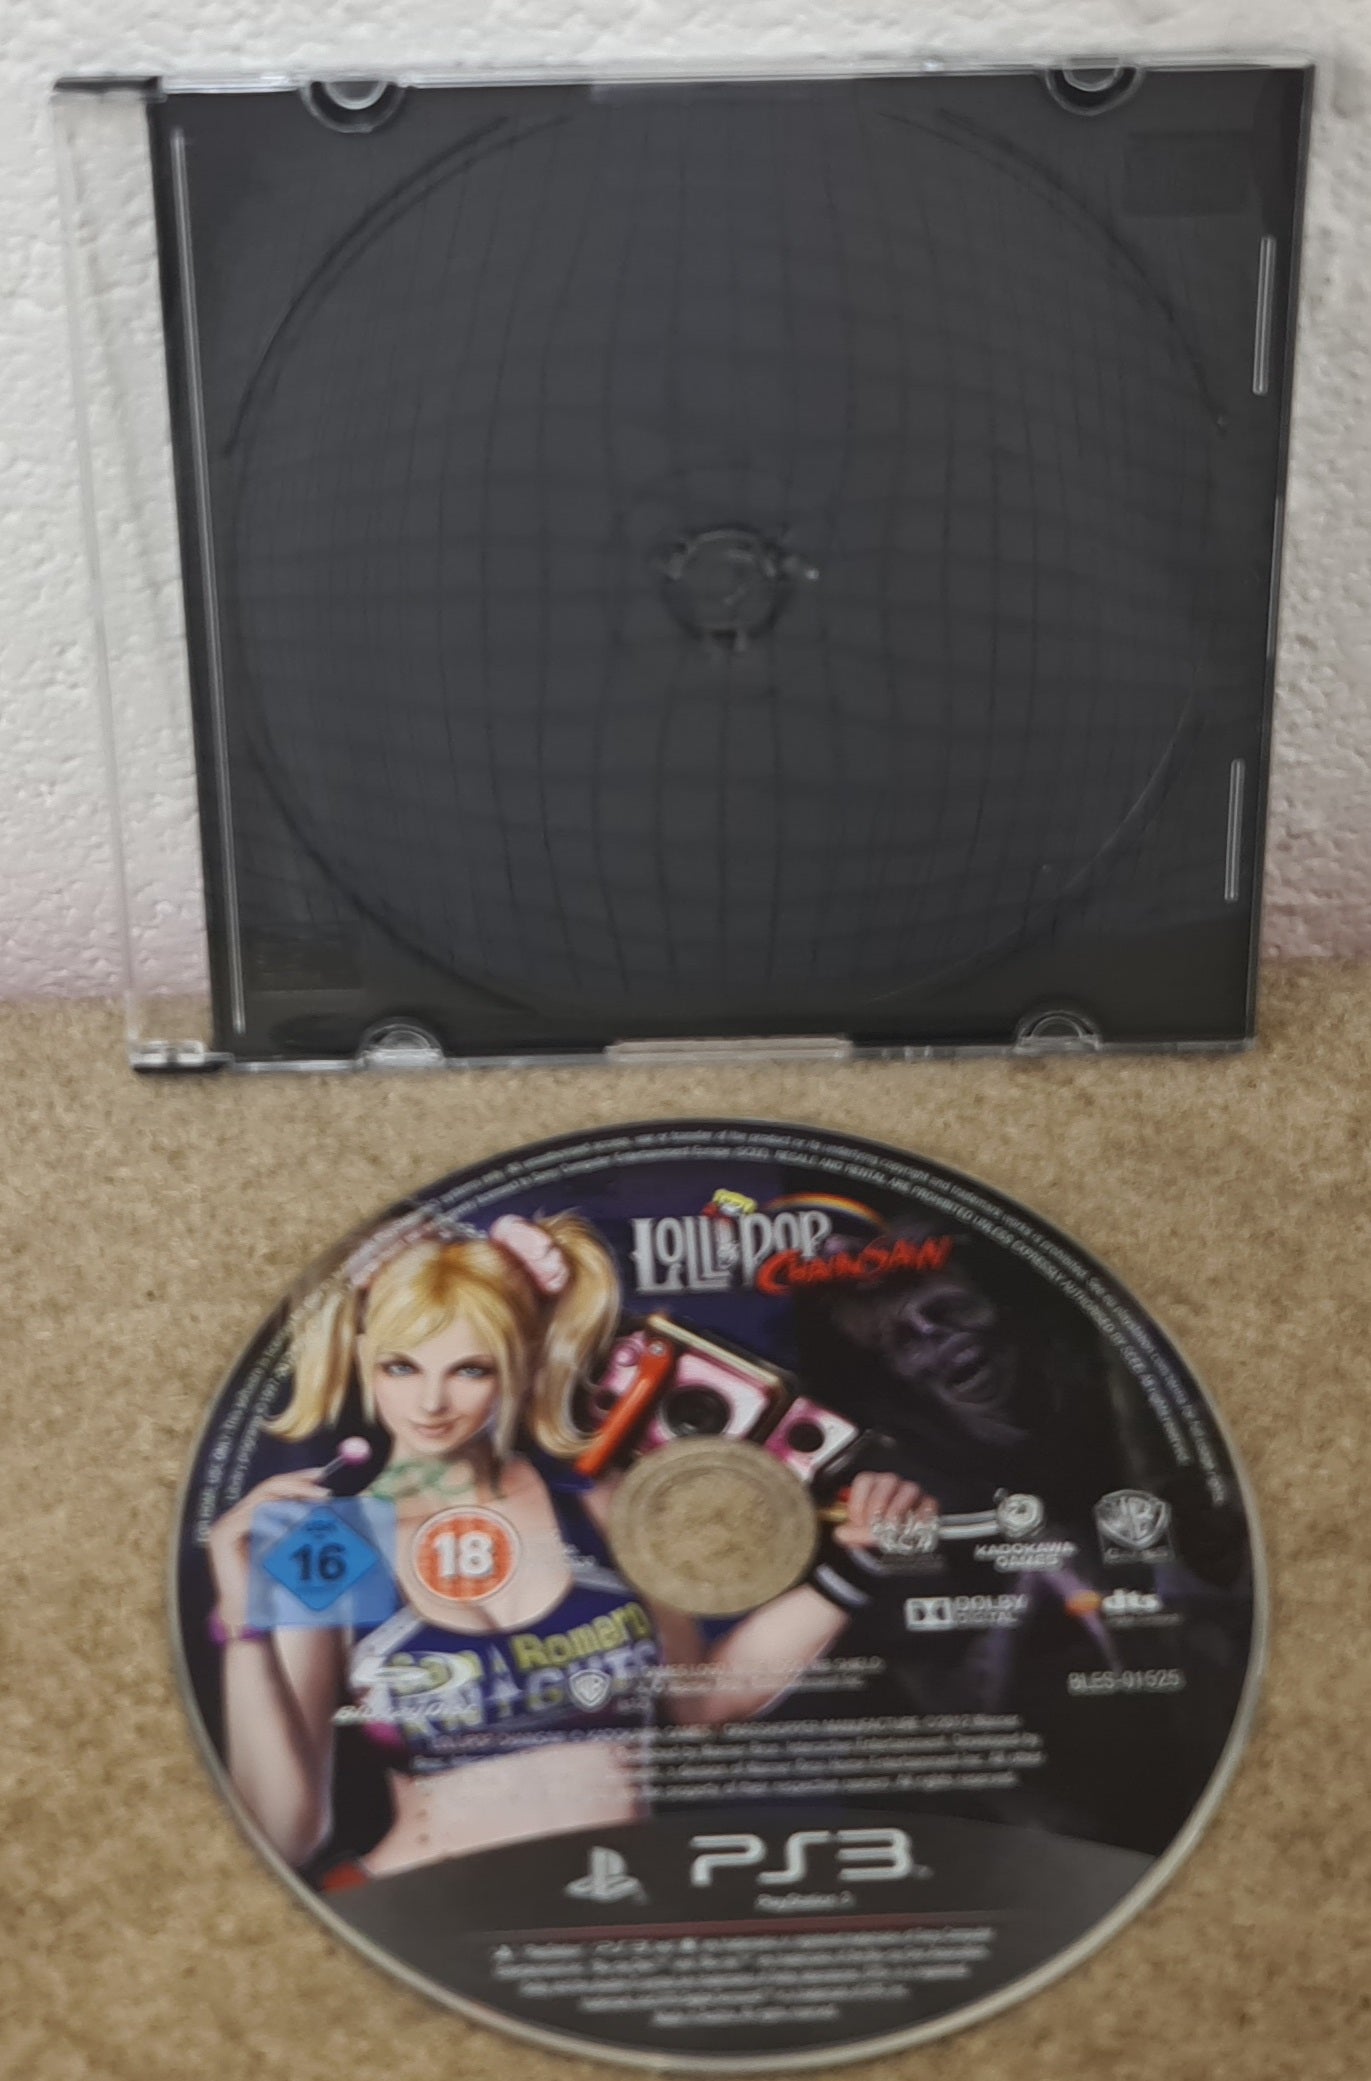 Lollipop Chainsaw Sony Playstation 3 (PS3) Game Disc Only